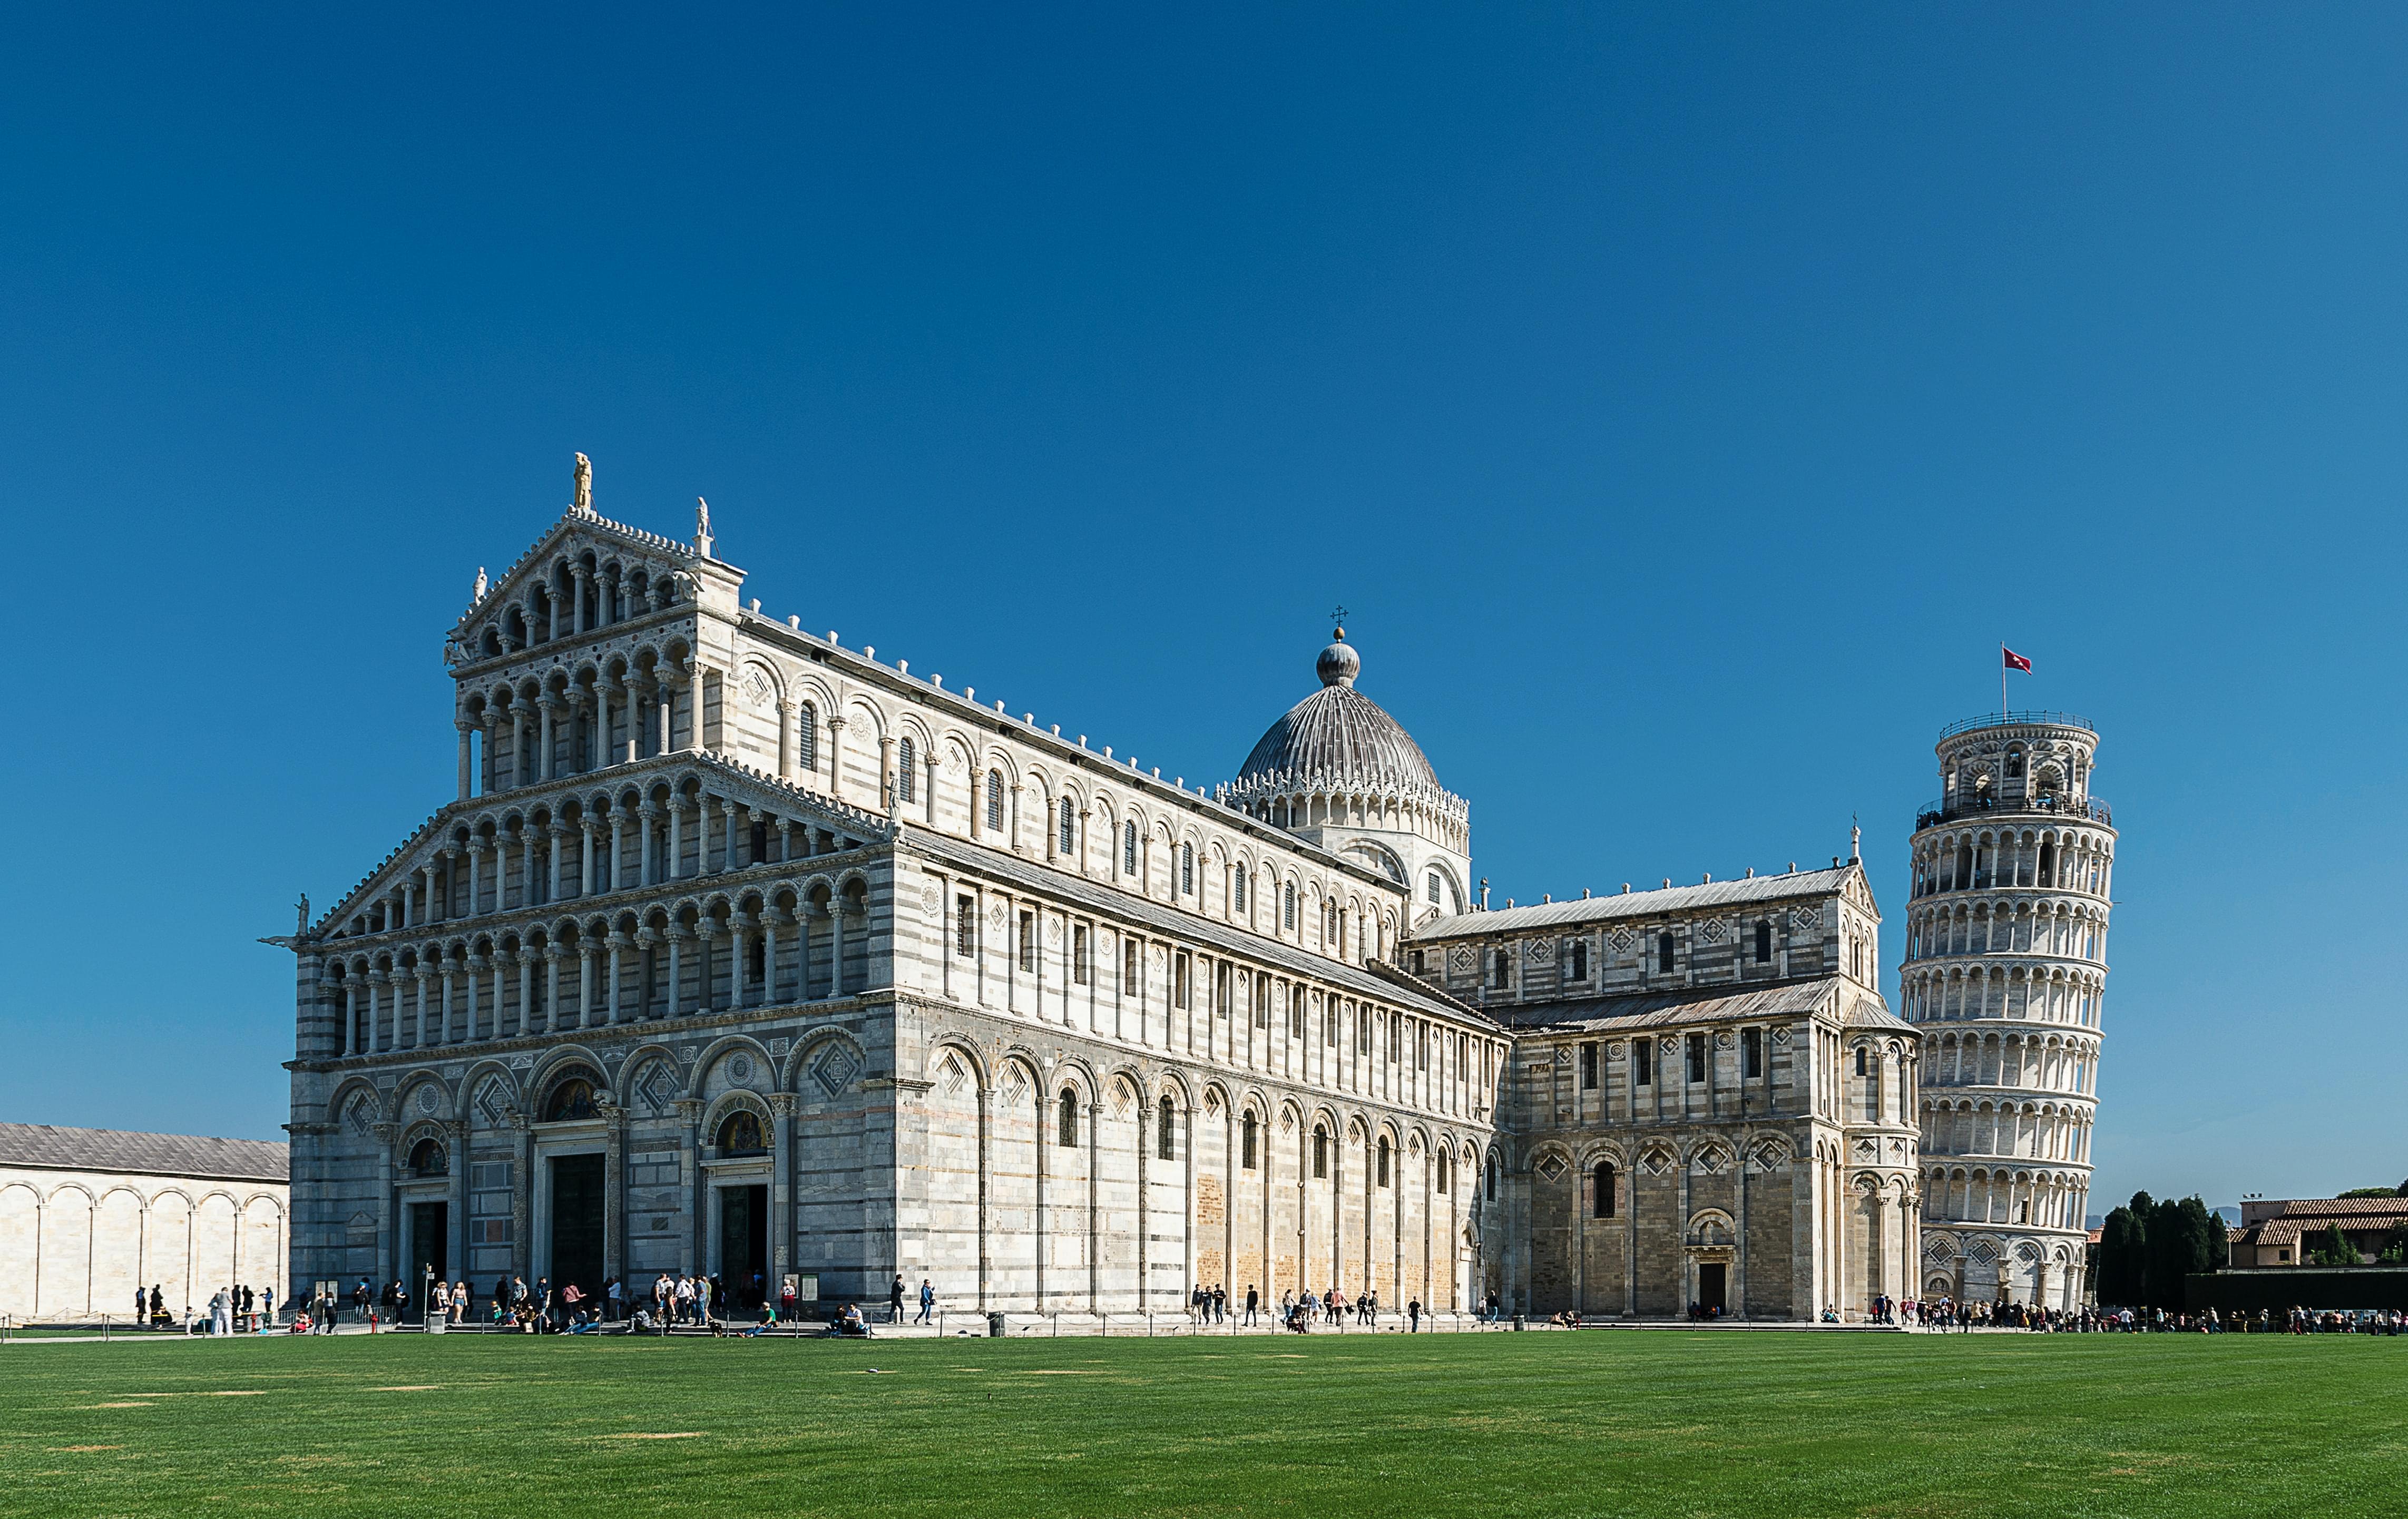 Leaning Tower of Pisa Architecture